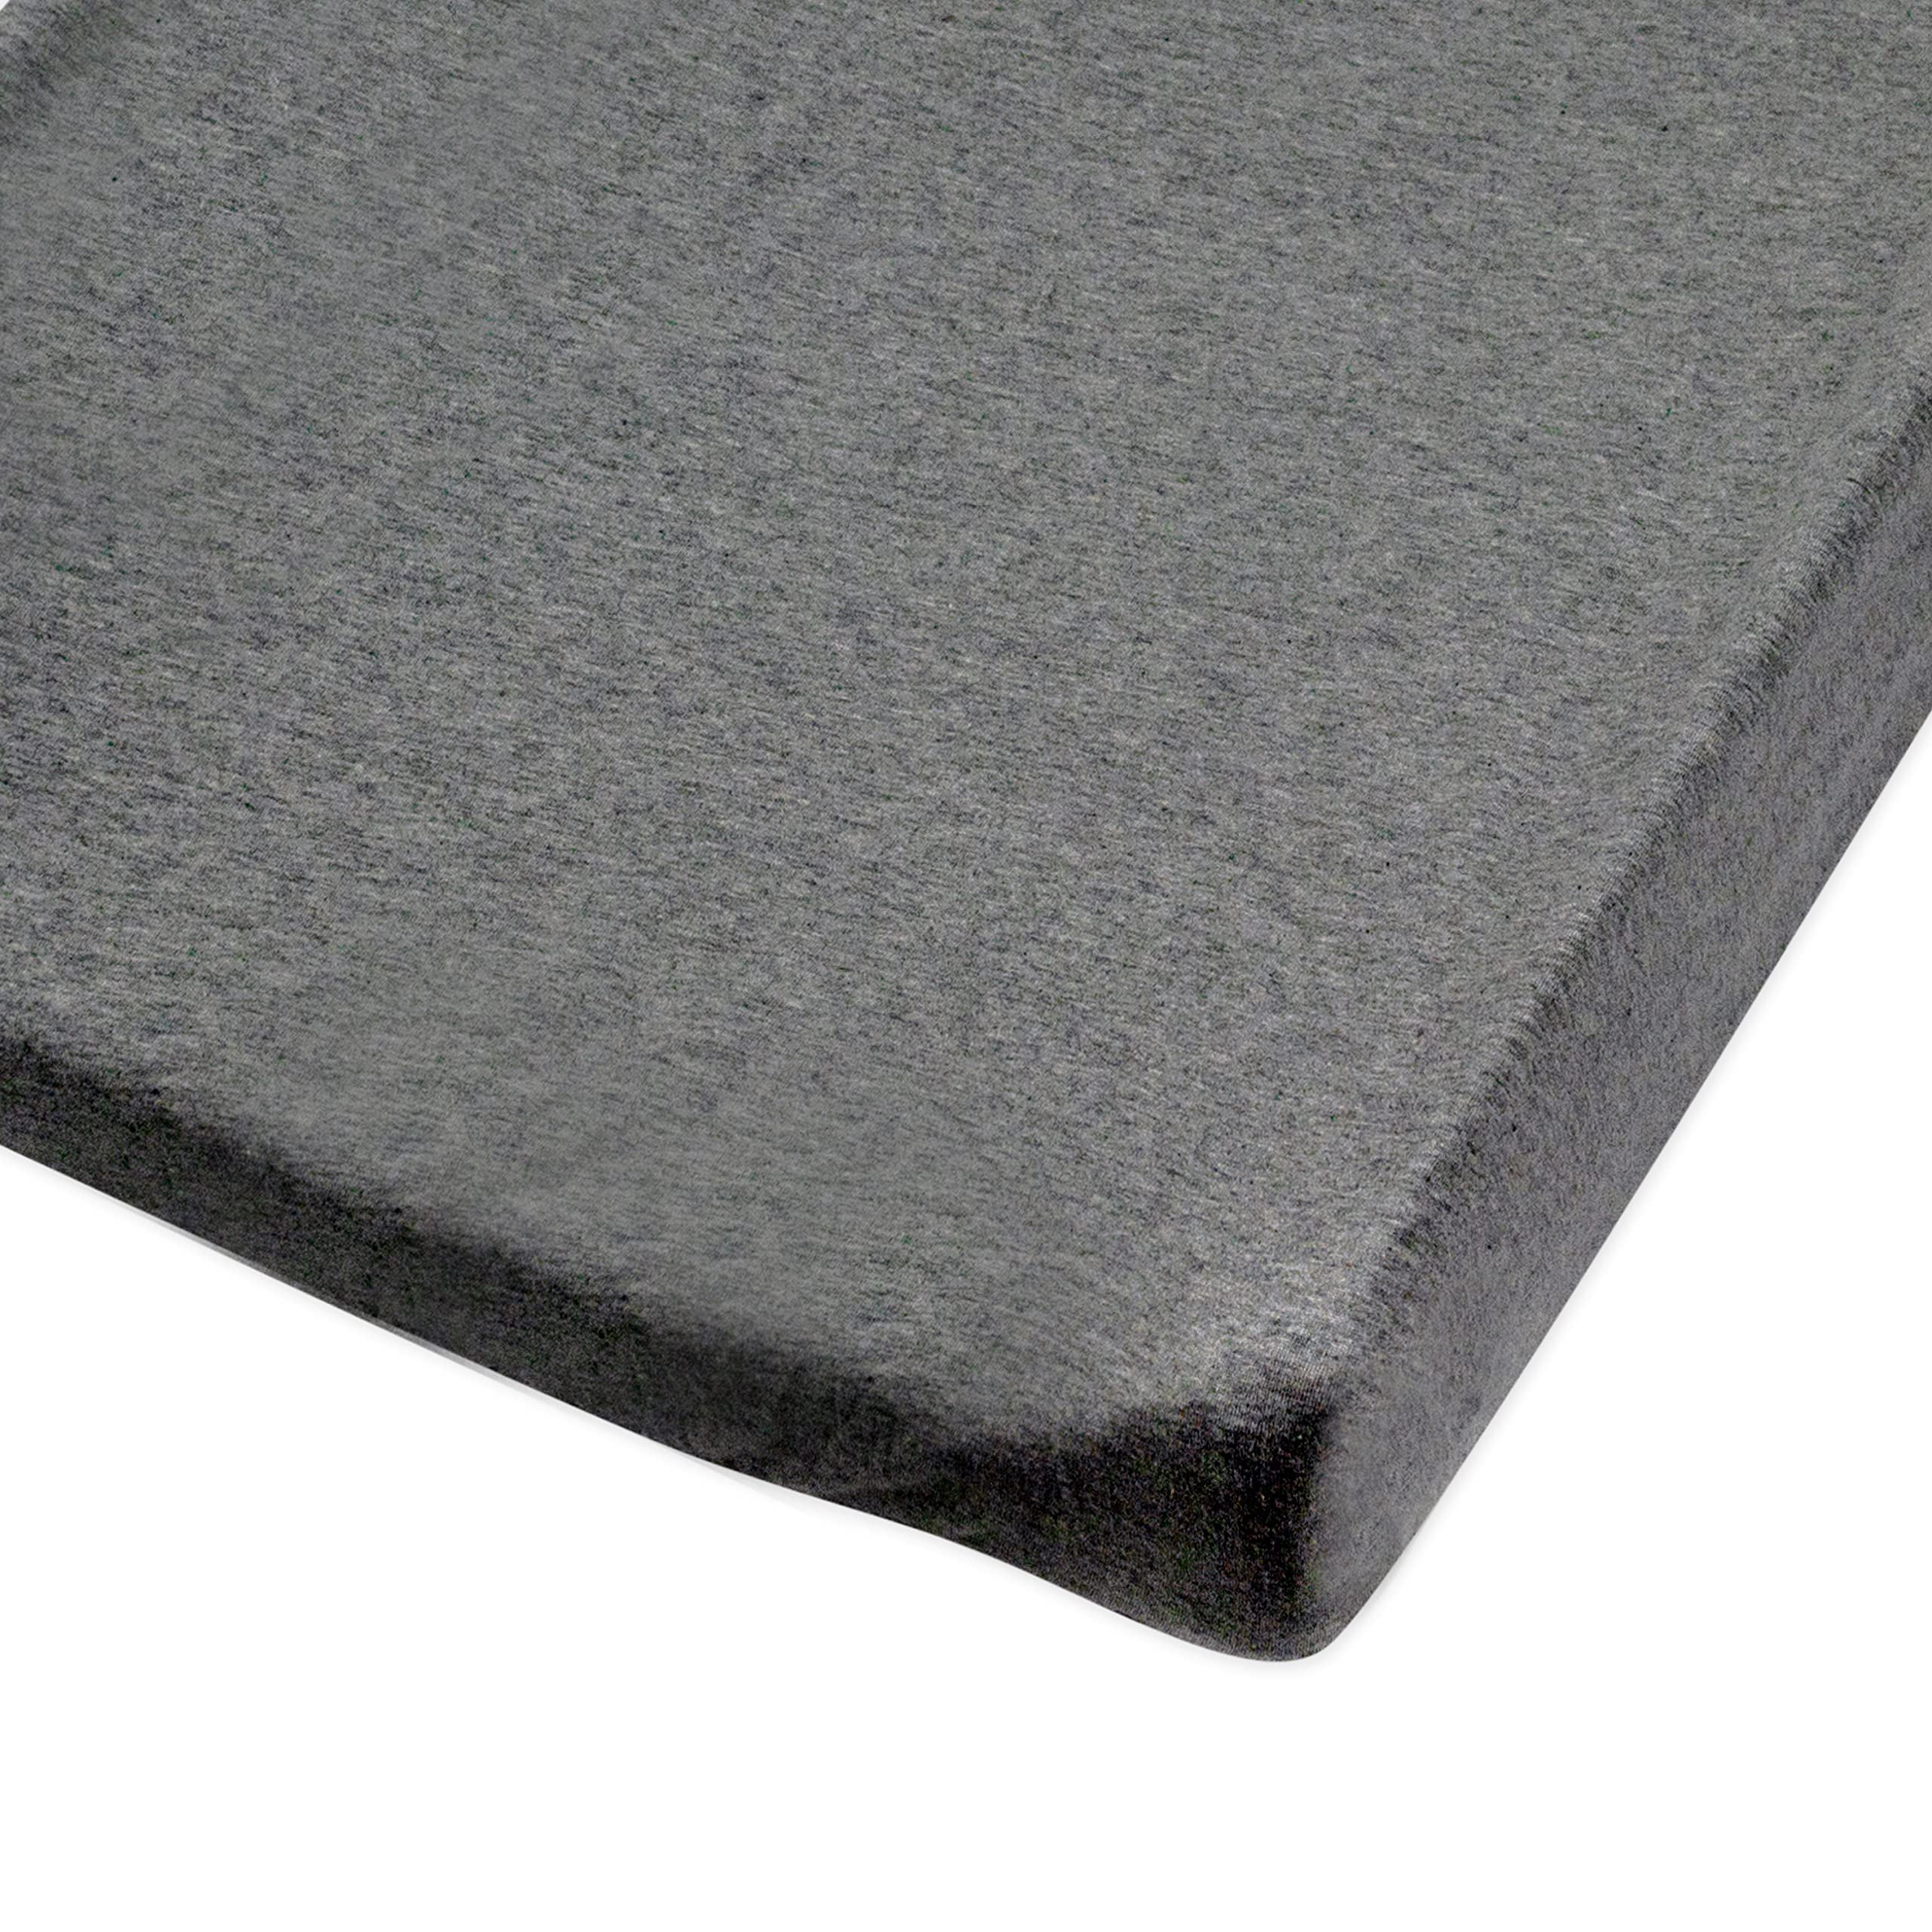 HonestBaby Boys Organic Cotton Changing Pad Cover, Gray Charcoal, One Size